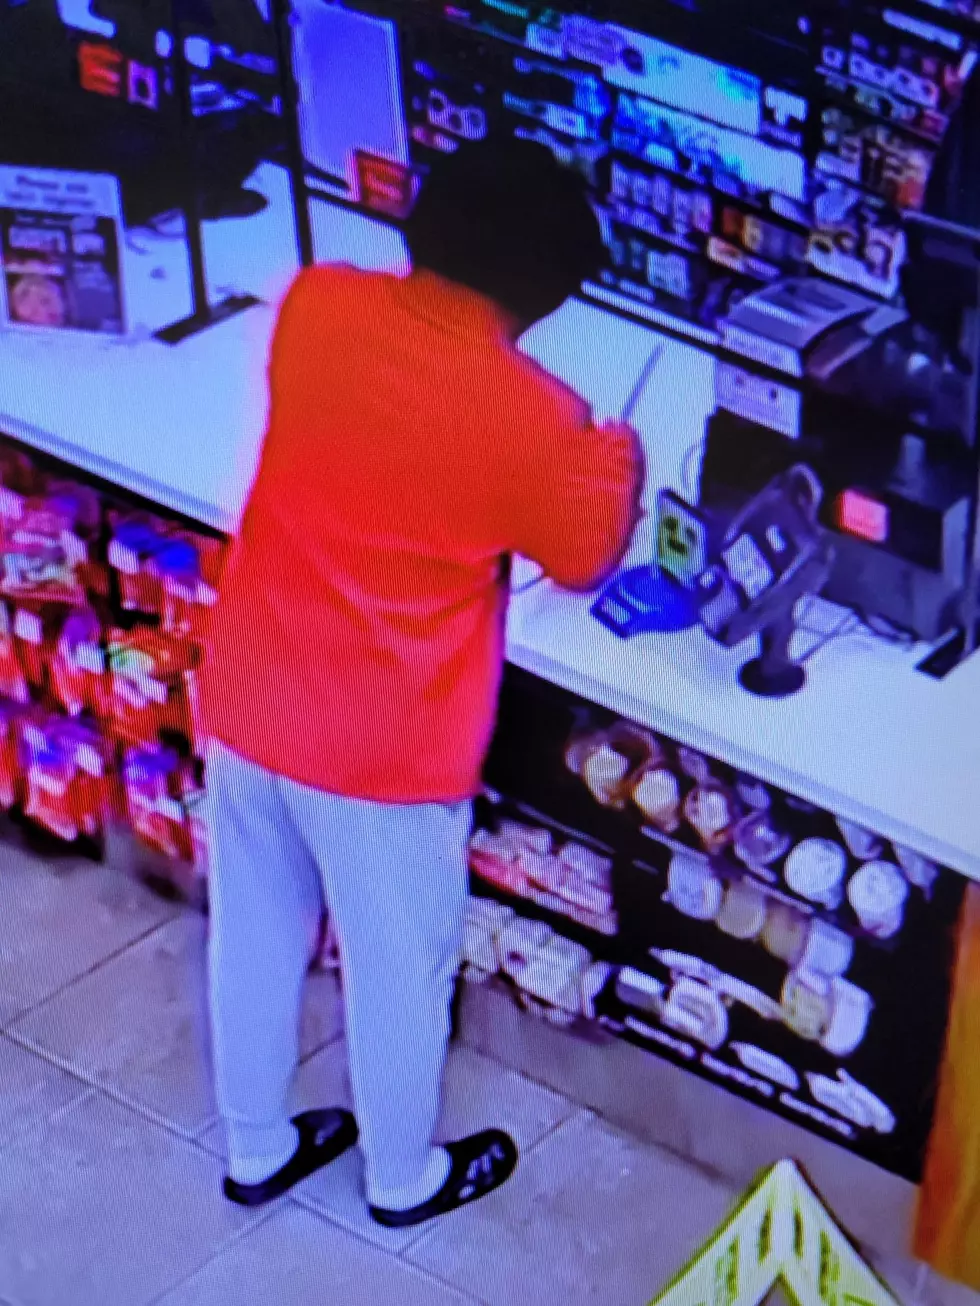 Man With ‘Large Knife’ Robs Rochester Convenience Store [UPDATED]